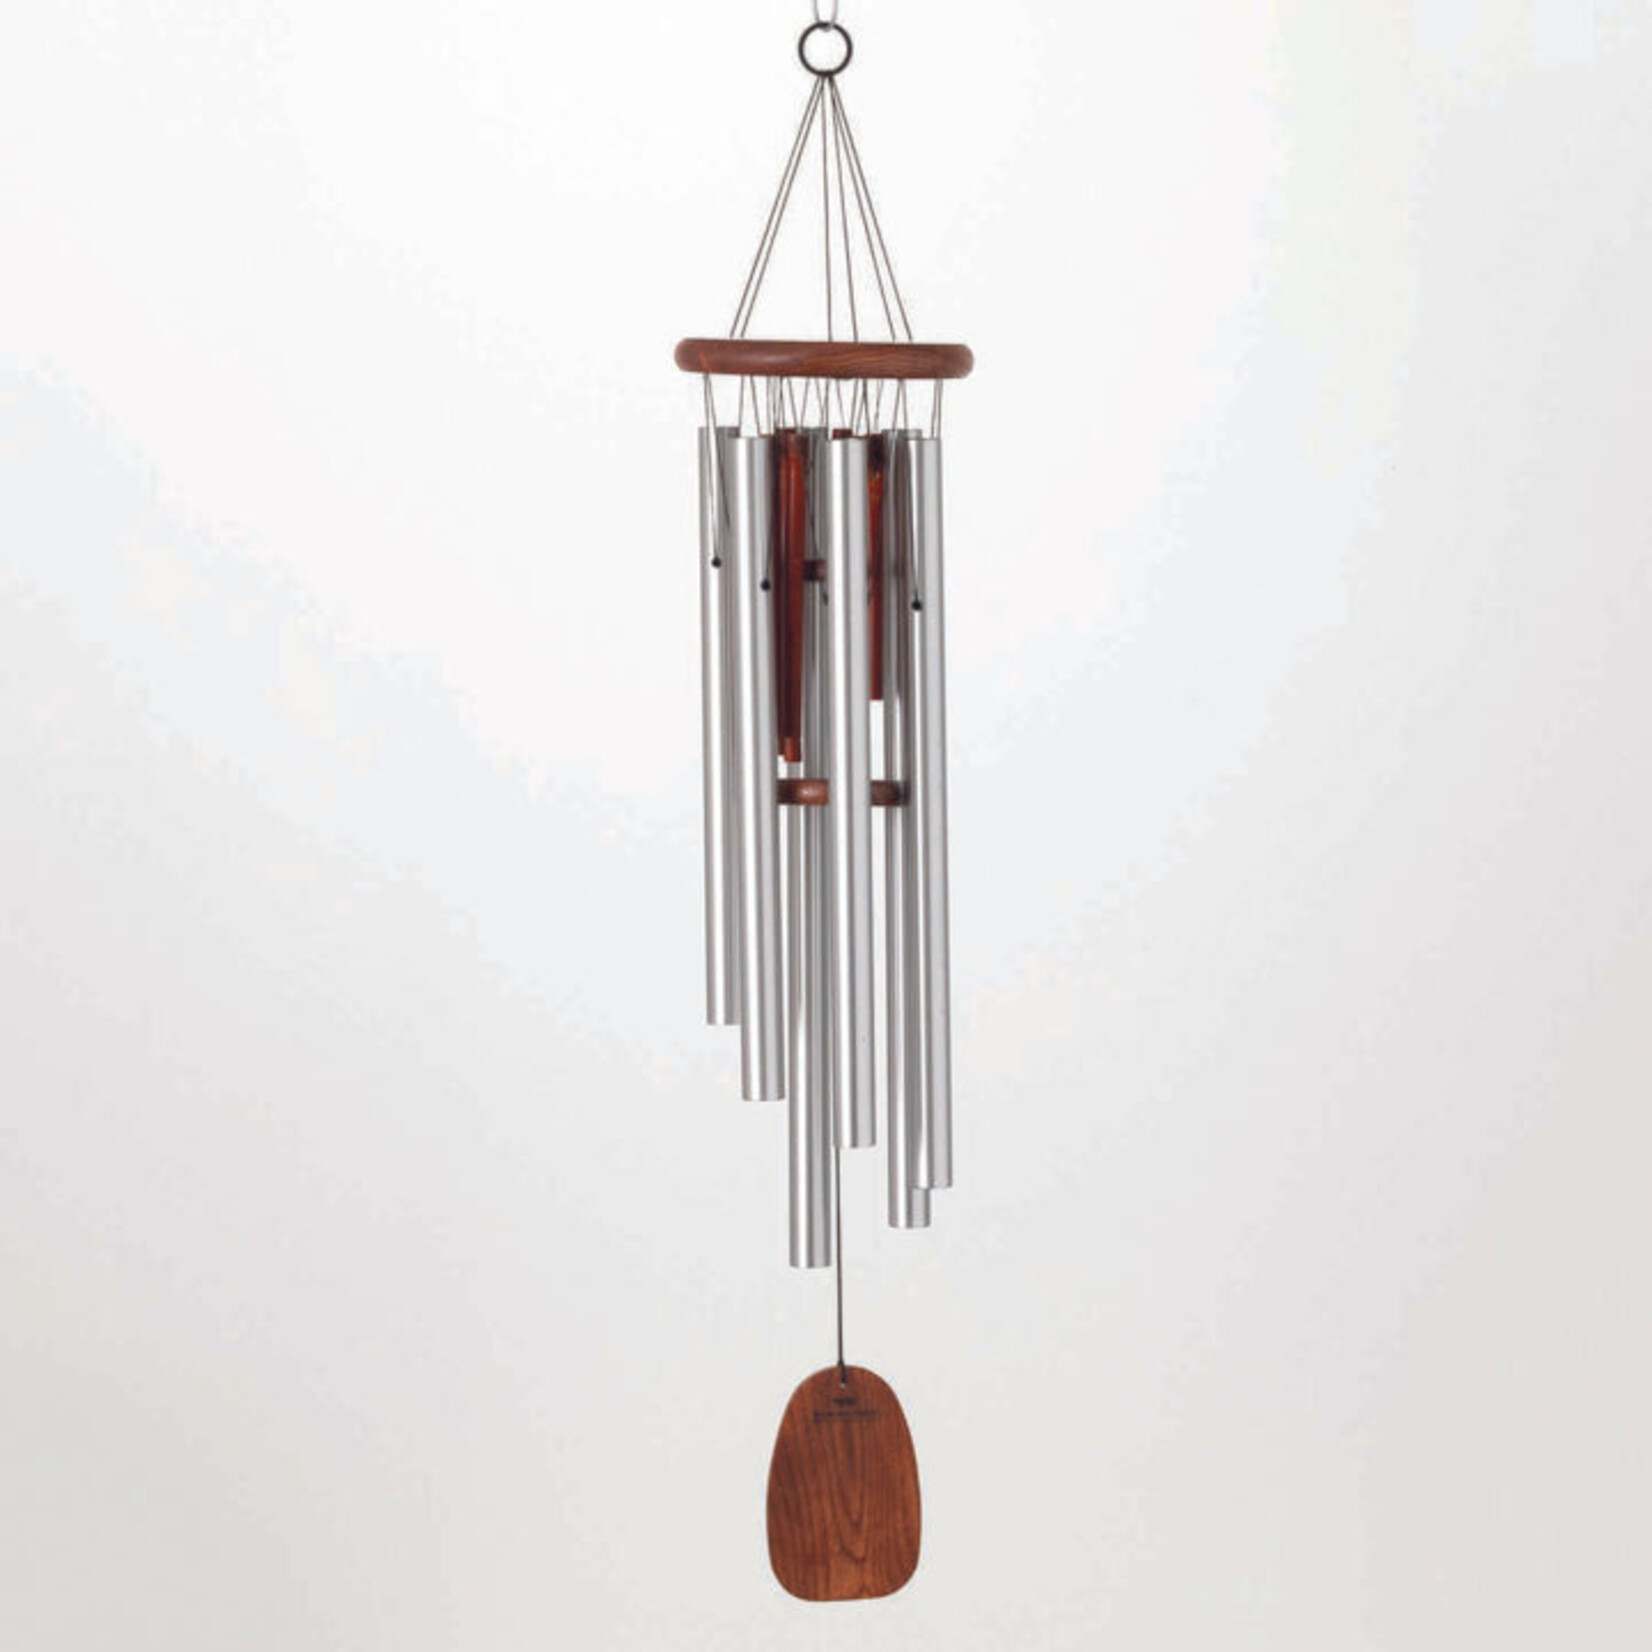 Woodstock Wind Chimes Singing in the Rain Chime large